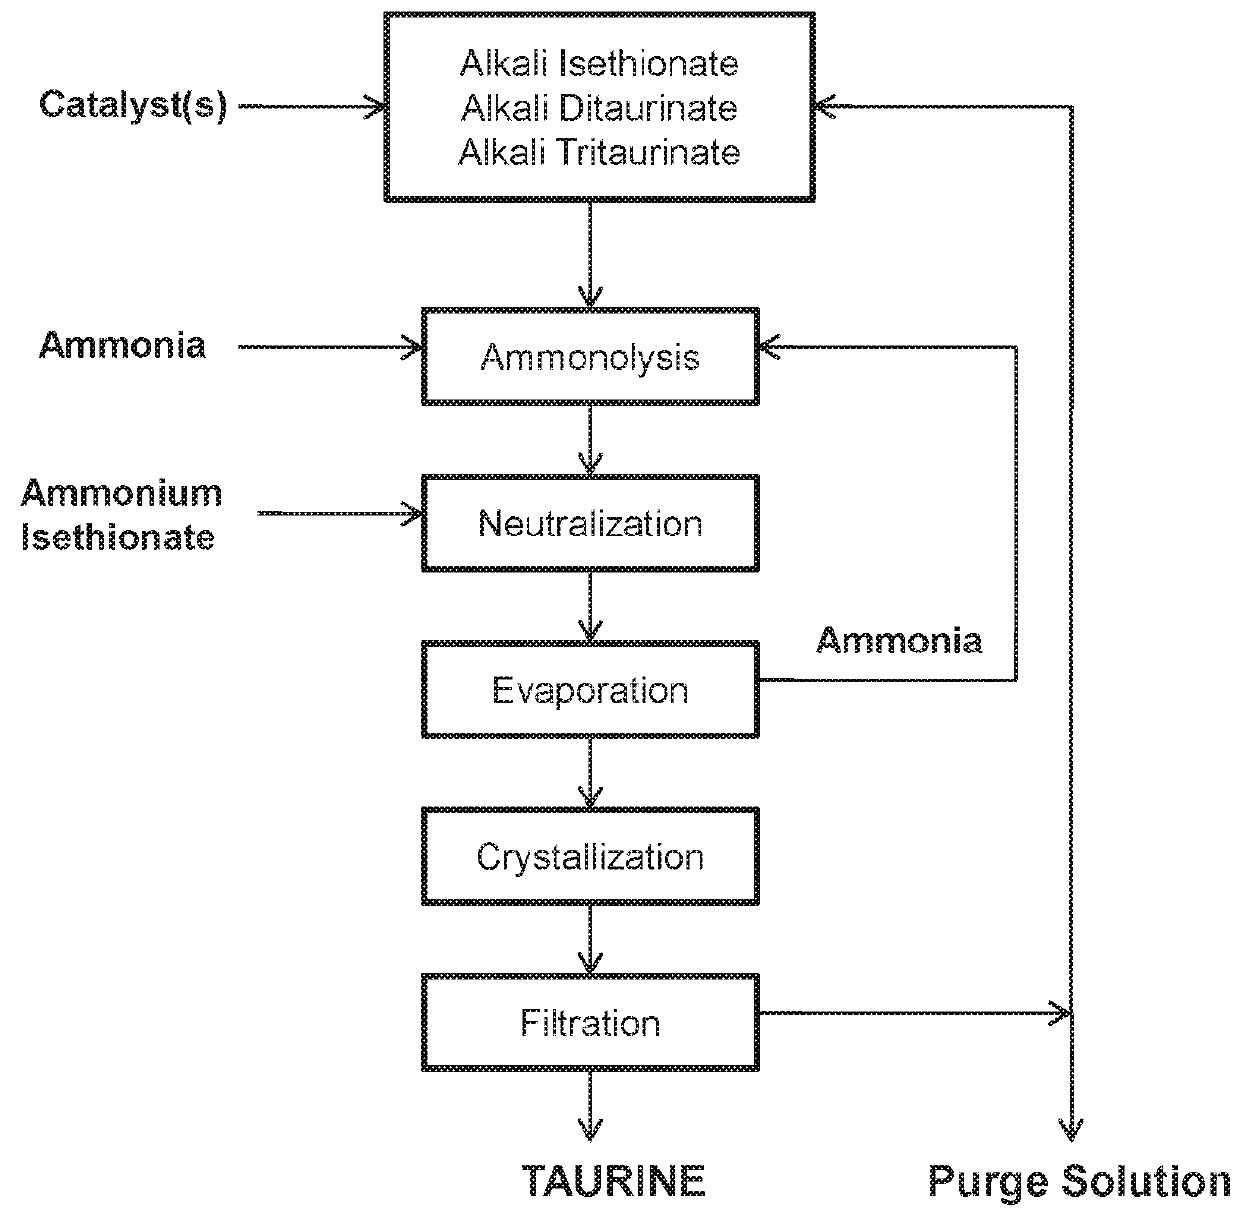 Cyclic process for producing taurine